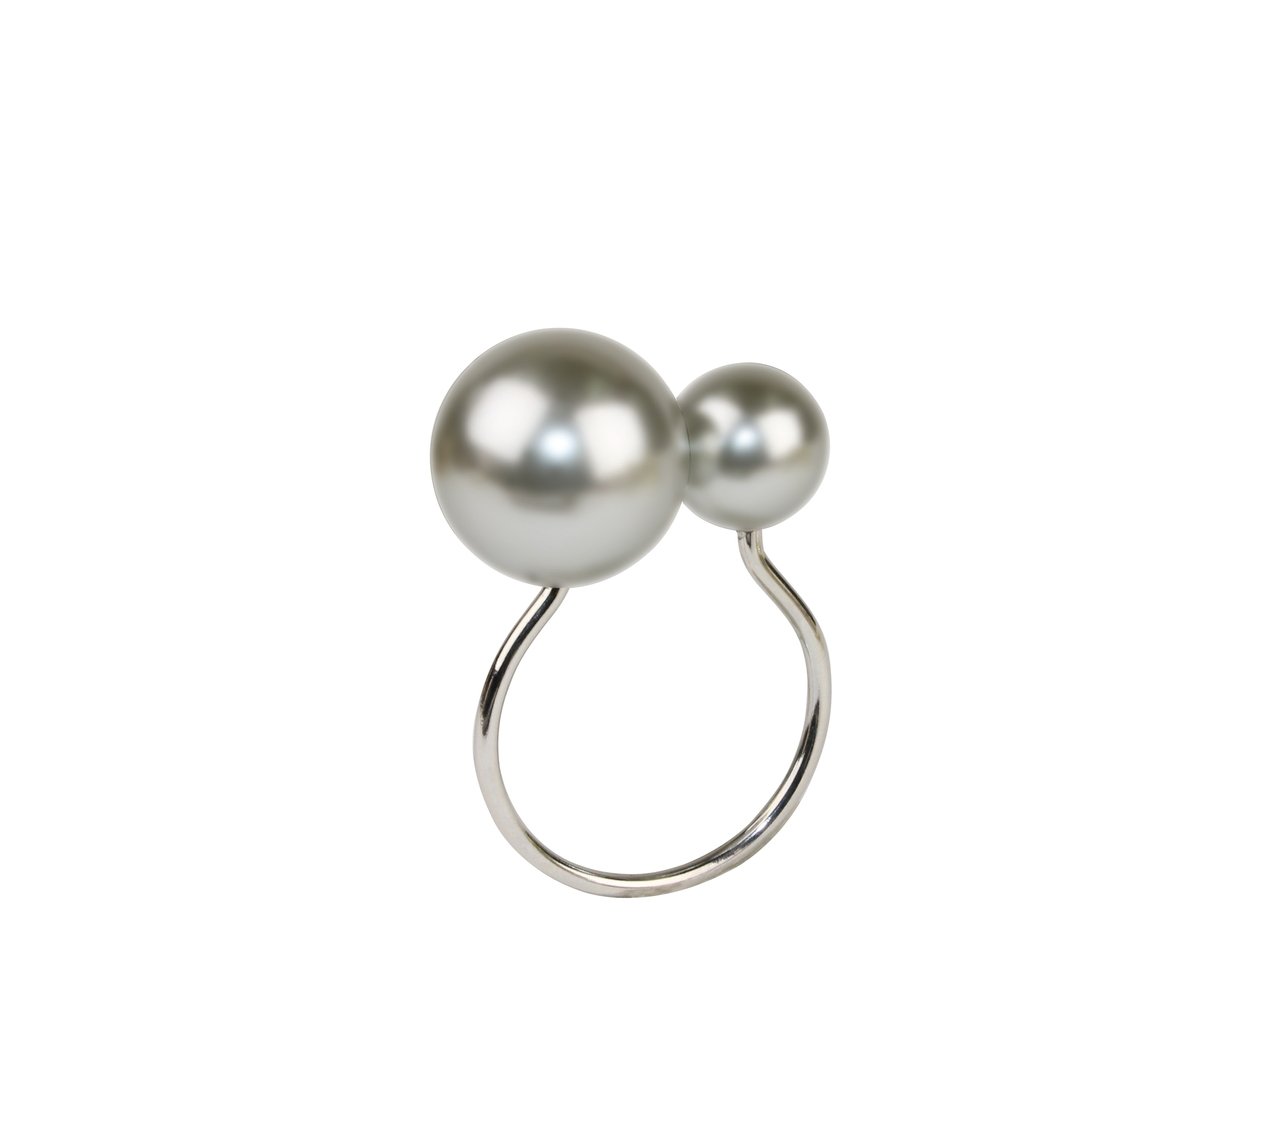 PEARL NAPKIN RING IN GRAY & SILVER - Pioneer Linens